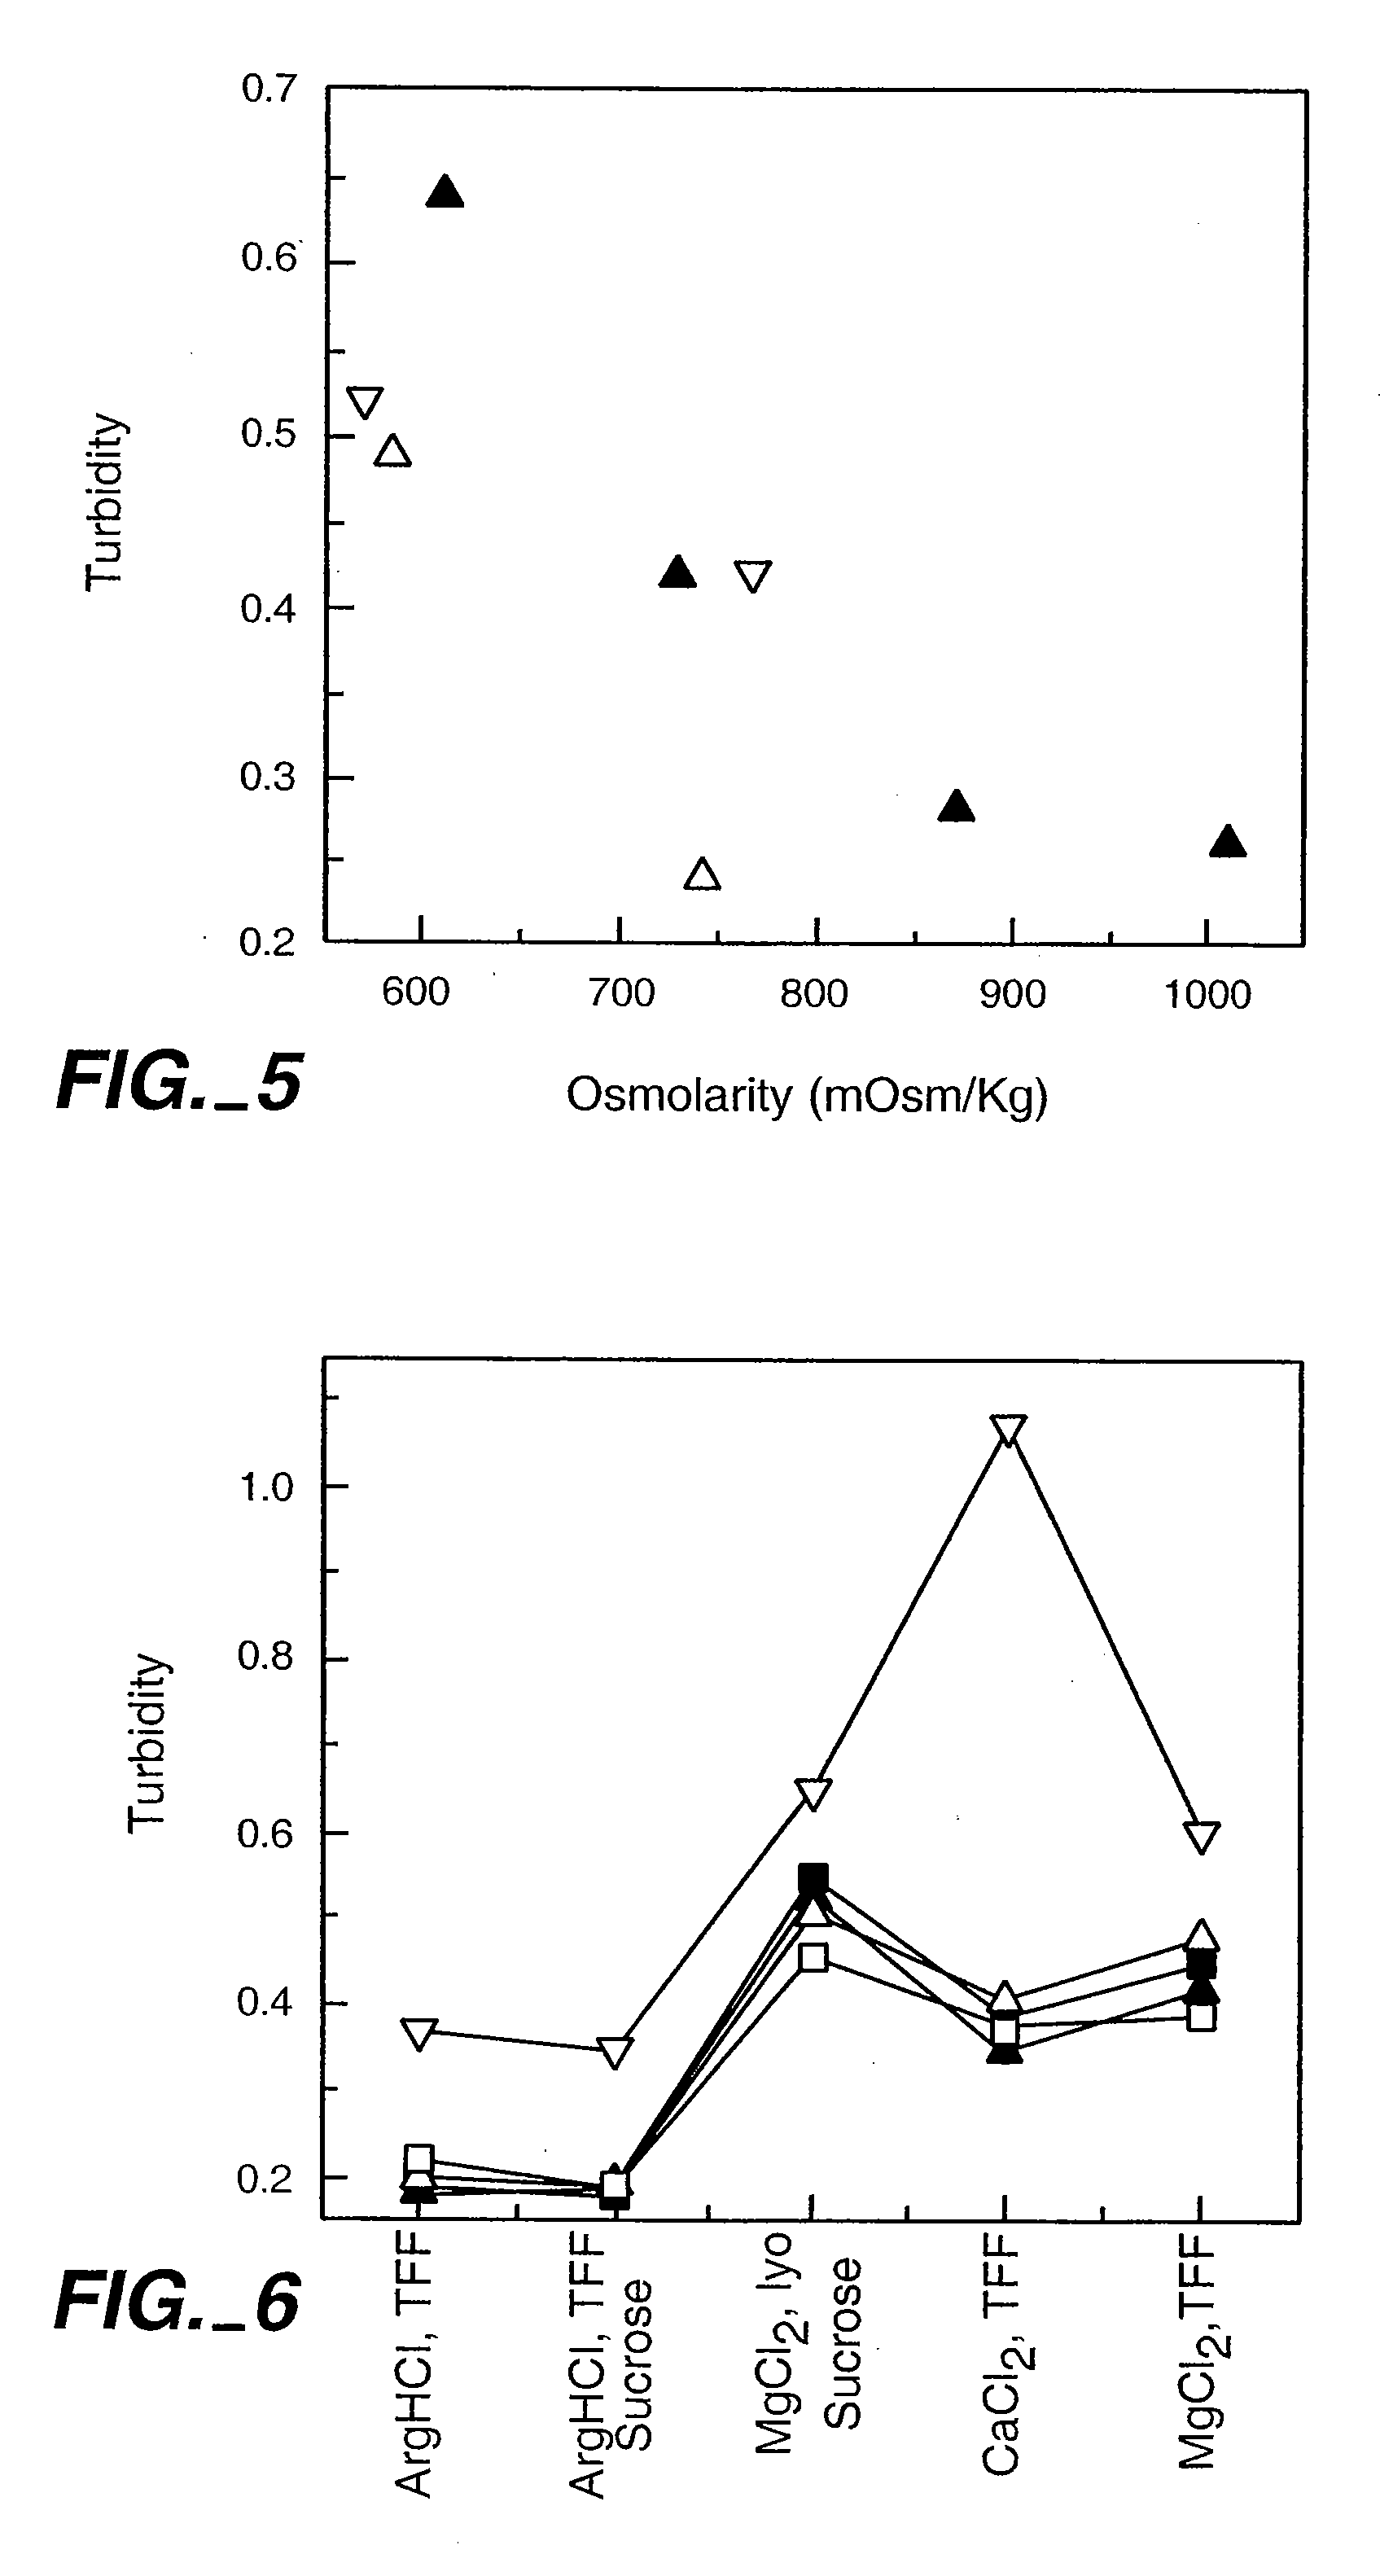 Methods of treating IgE-mediated disorders comprising the administration of high concentration anti-IgE antibody formulations